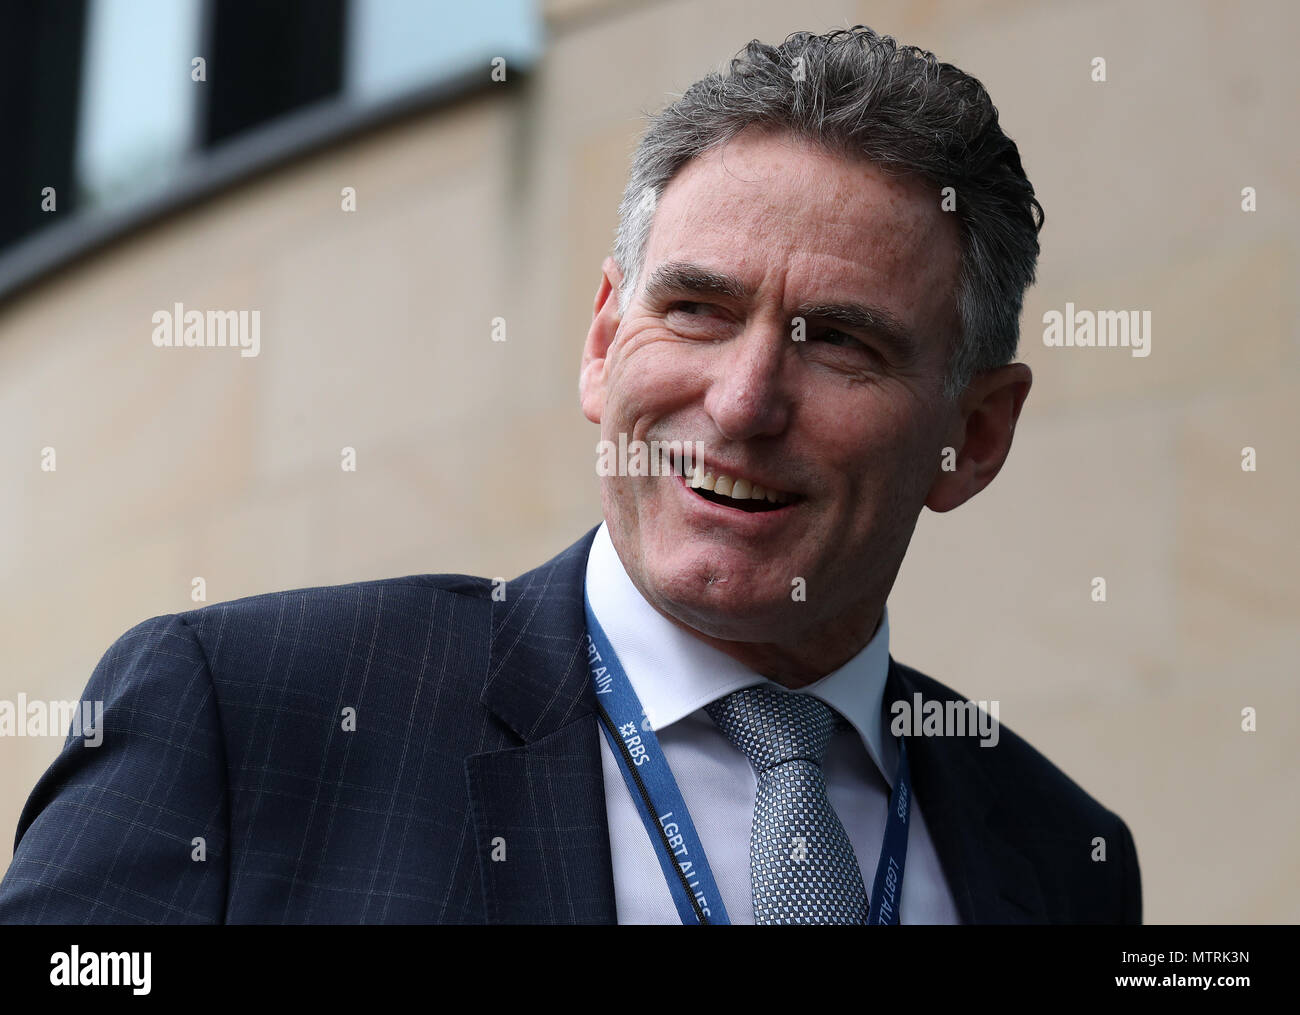 RBS Chief Executive Ross McEwan arrives for the Royal Bank of Scotland AGM arrive for the Royal Bank of Scotland annual general meeting at RBS Headquarters in Gogarburn, Edinburgh. Stock Photo